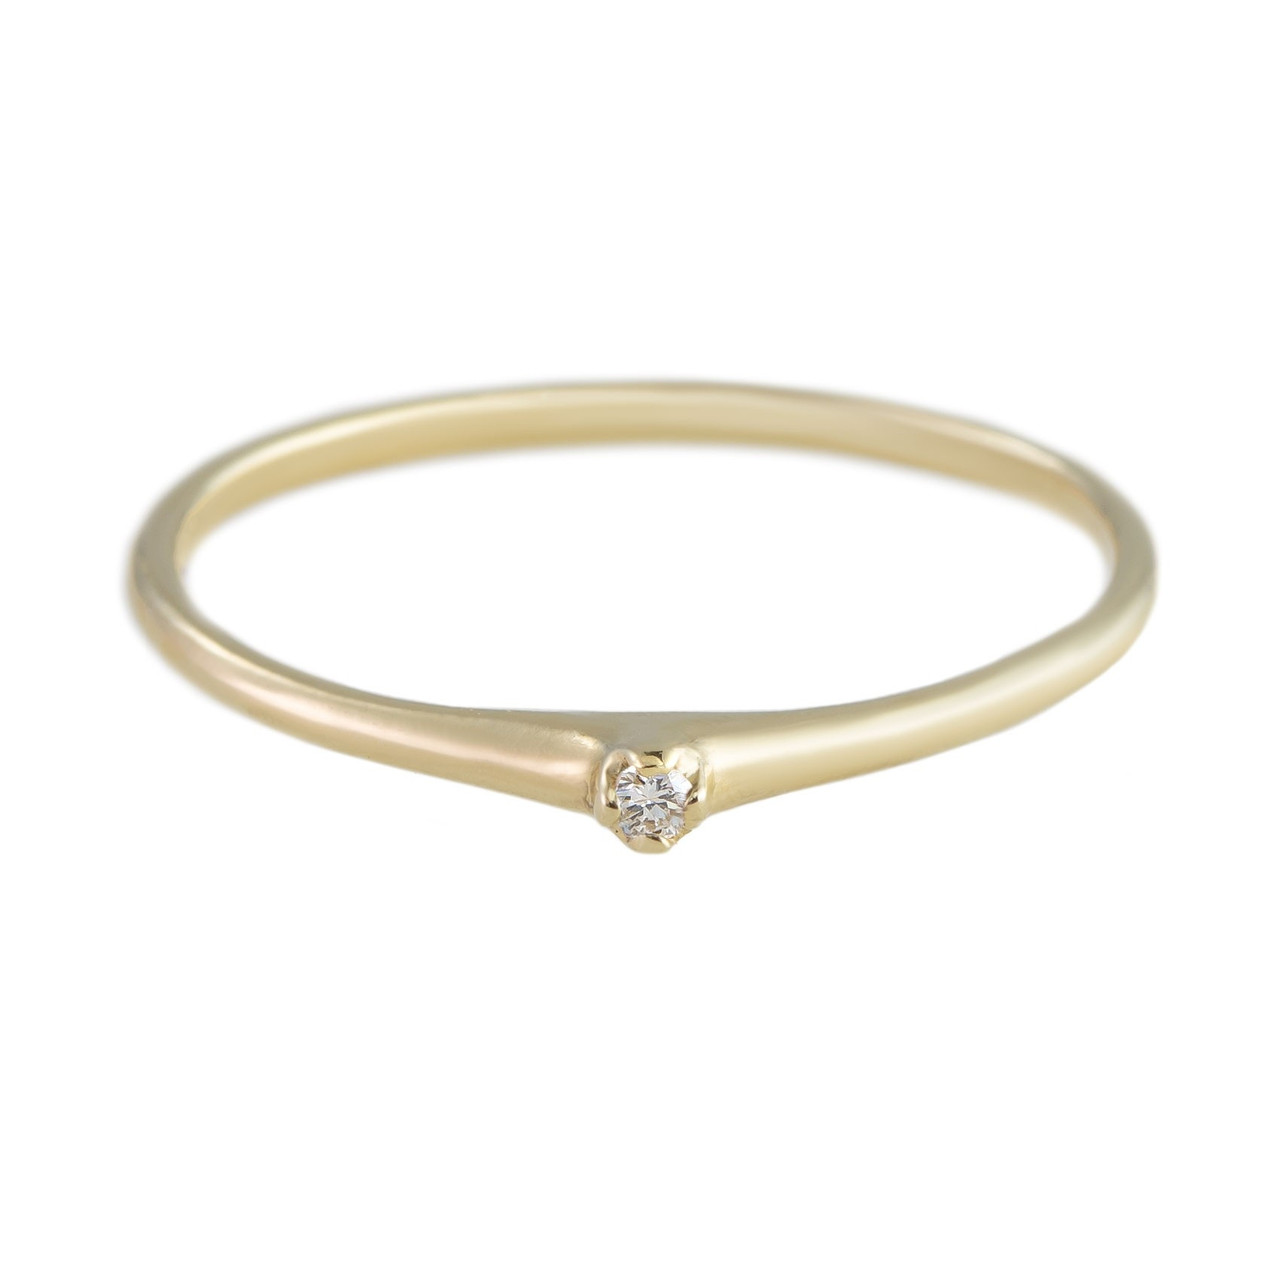 n+a New York, Petite 14ct Yellow Gold Ring, Tomfoolery